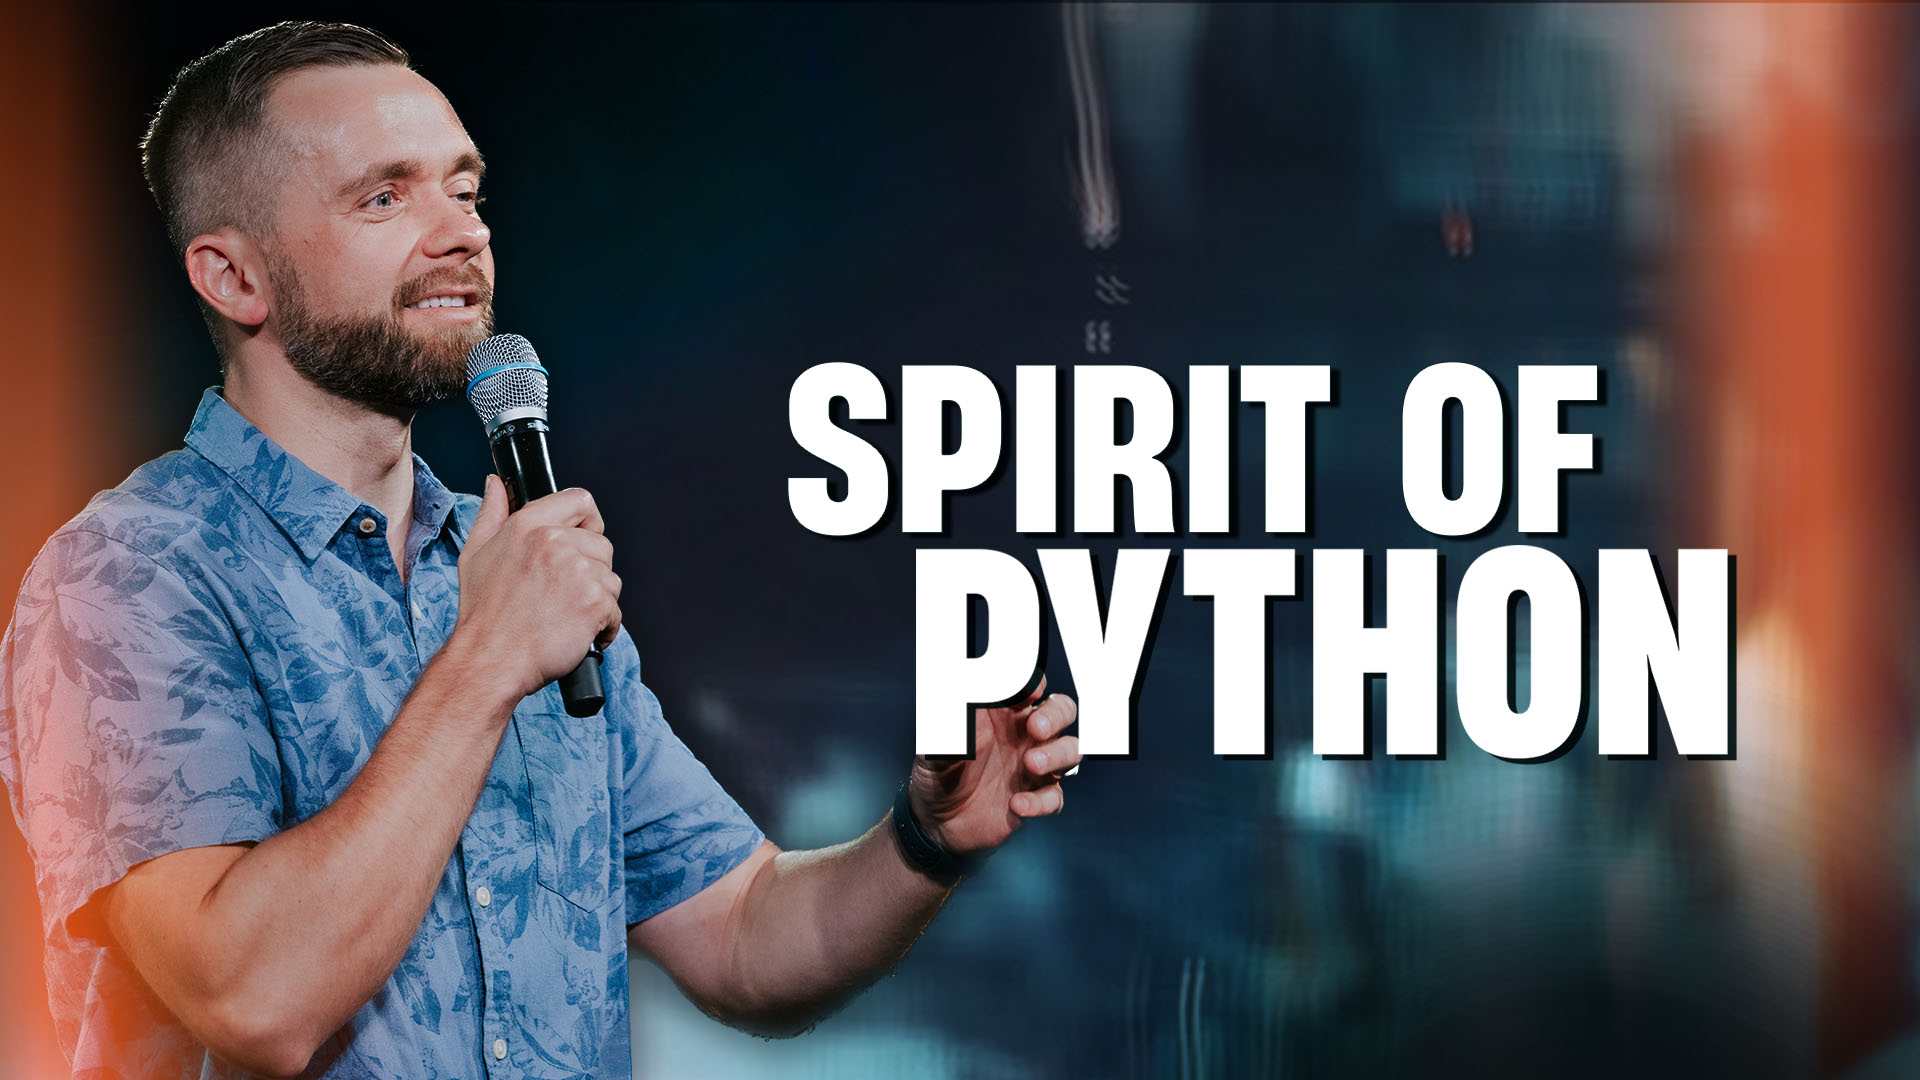 Featured Image for “Spirit of Python”